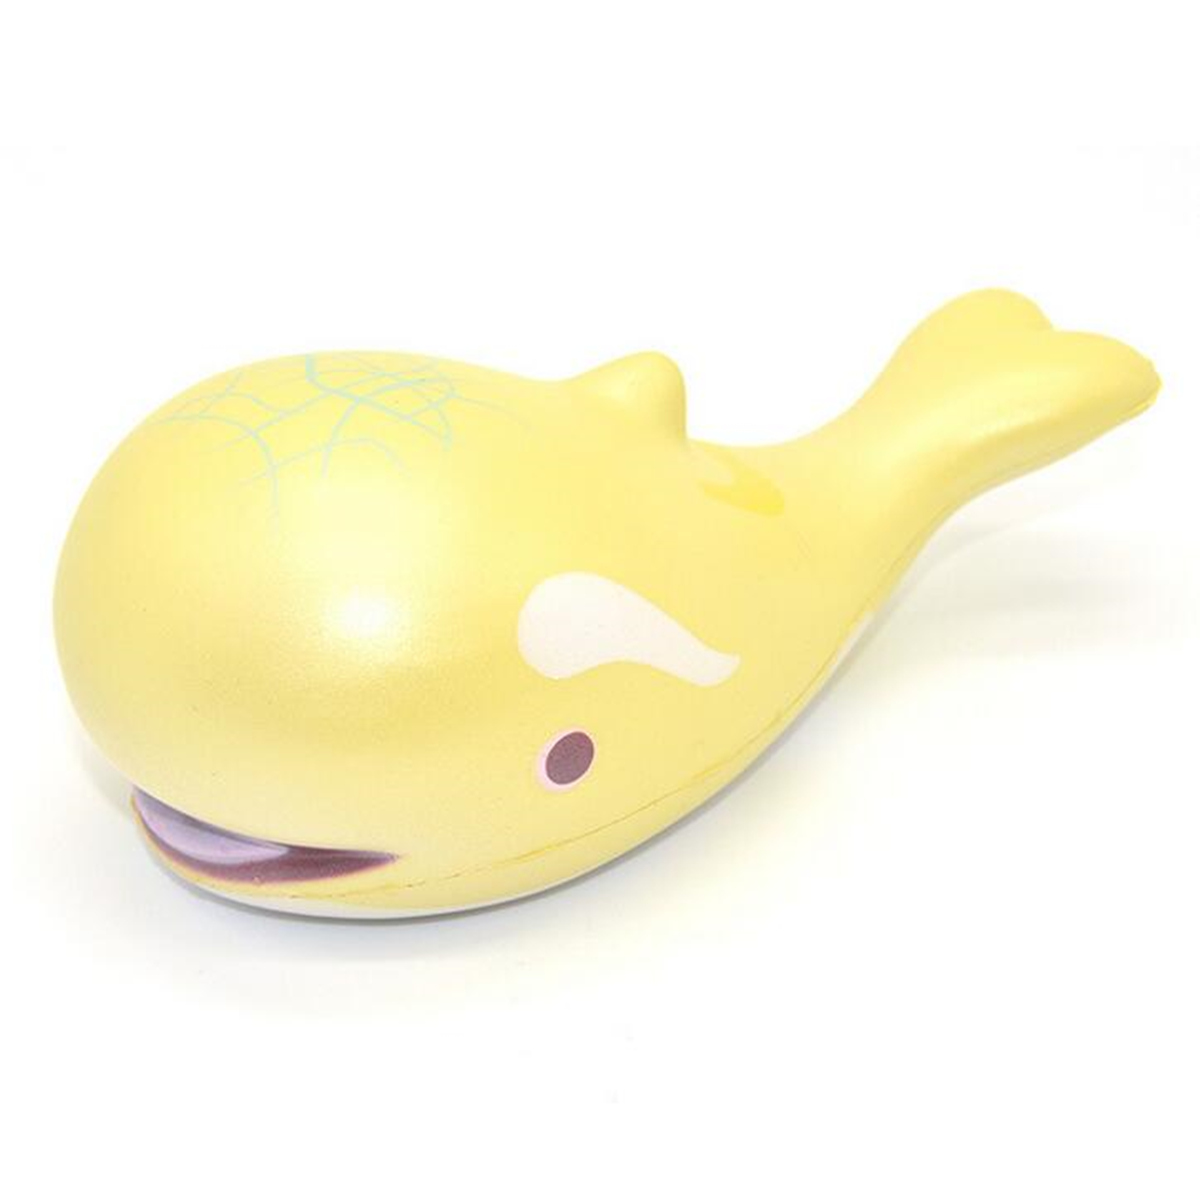 15cm-Whale-Squishy-Slow-Rising-Pressure-Release-Soft-Toy-With-Keychains-for-Iphone-Samsung-Xiaomi-1145805-4